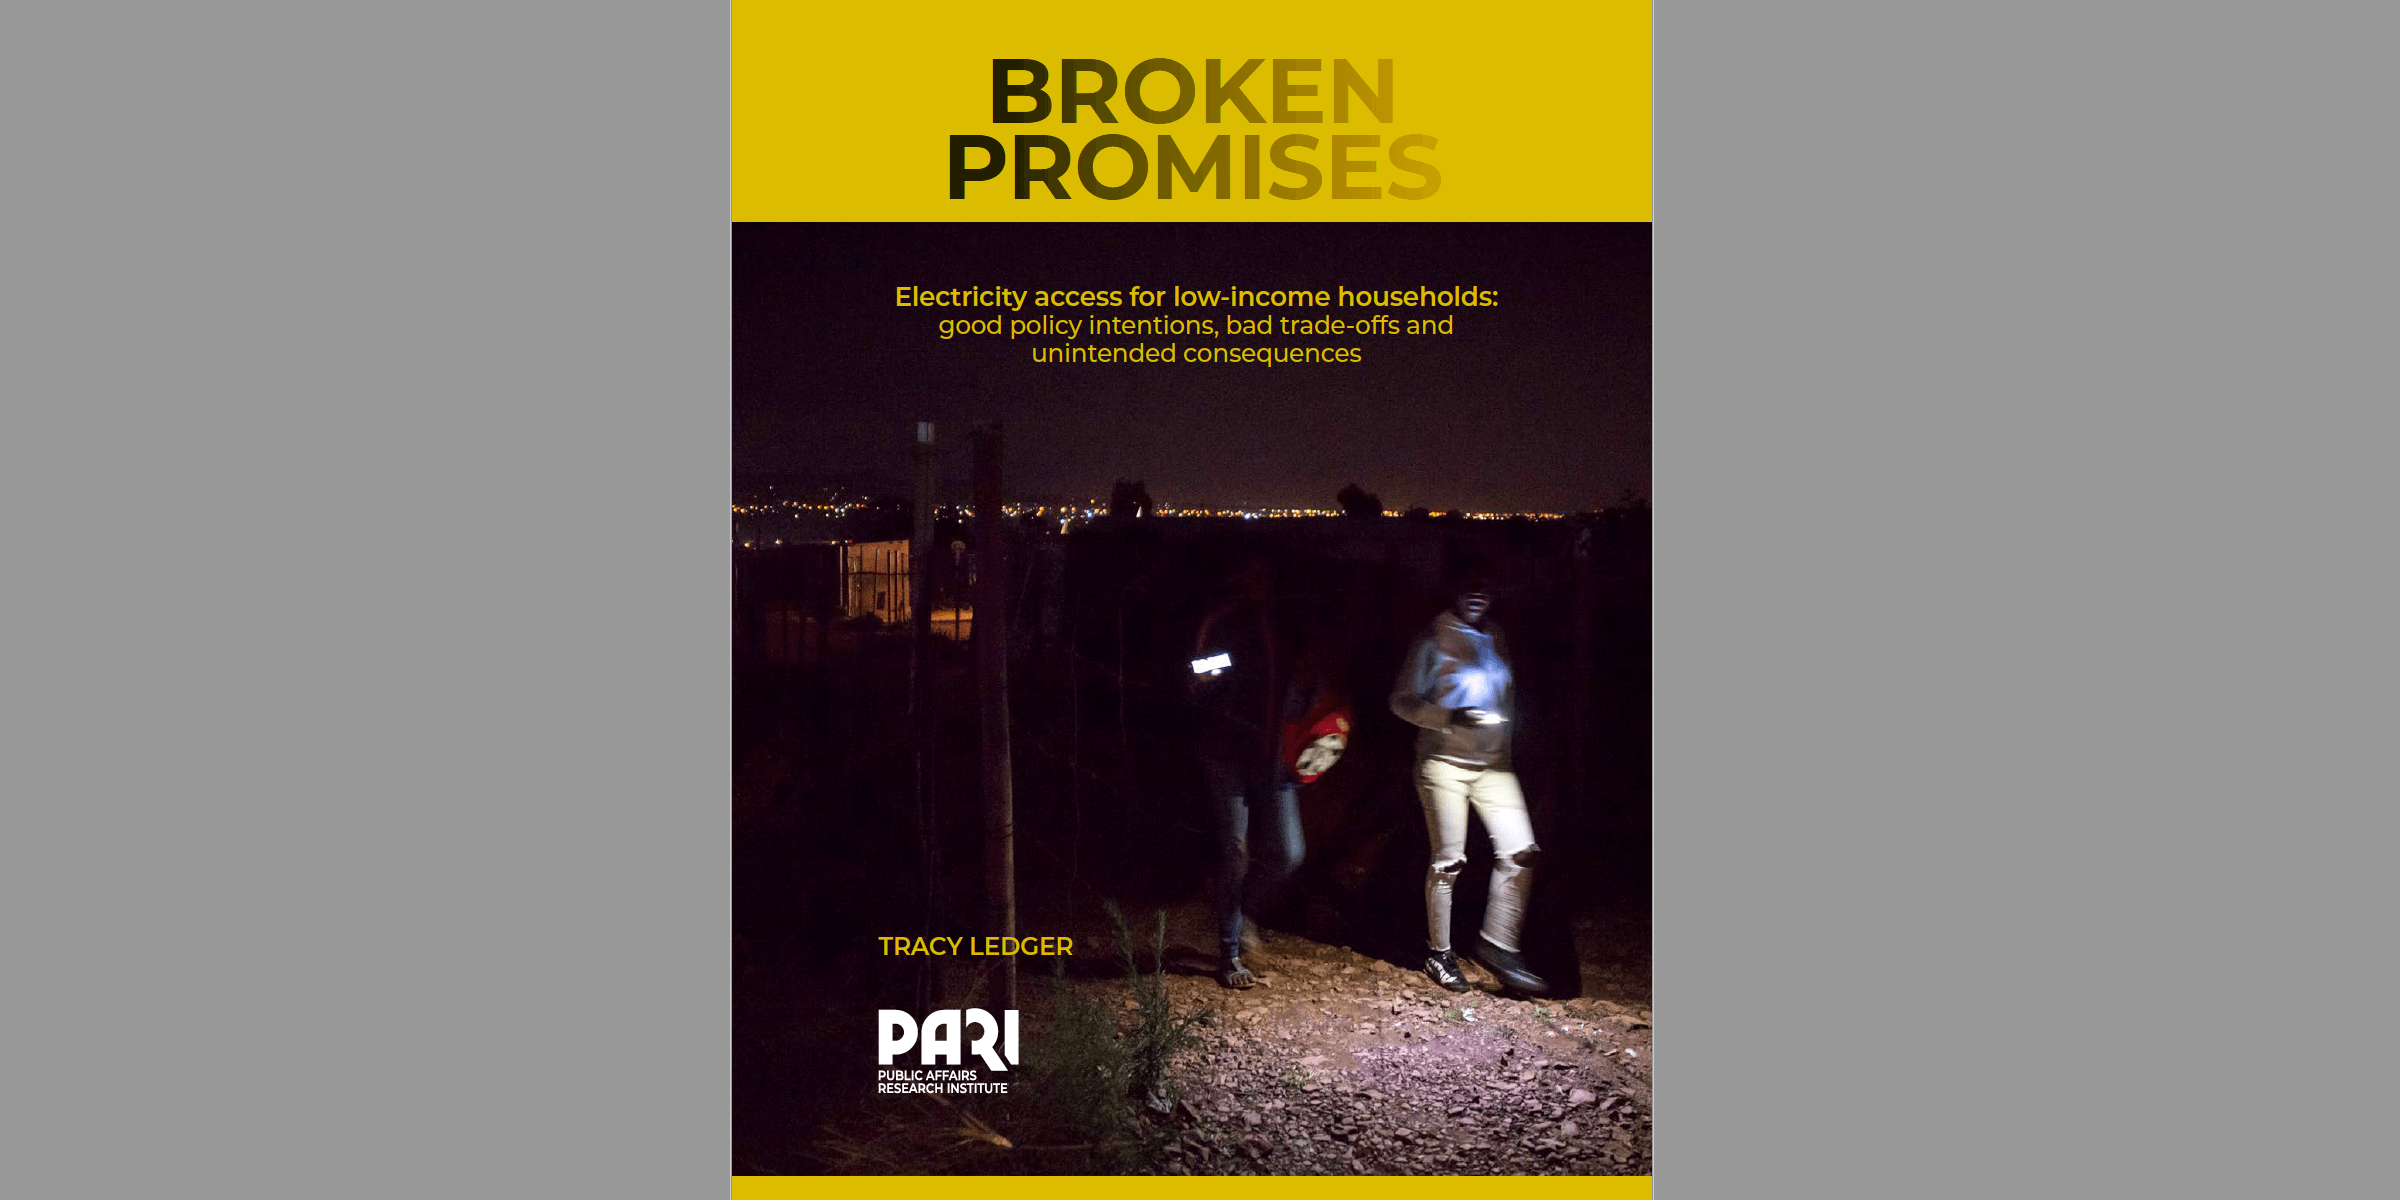 Broken Promises | New research from the EnergySociety programme